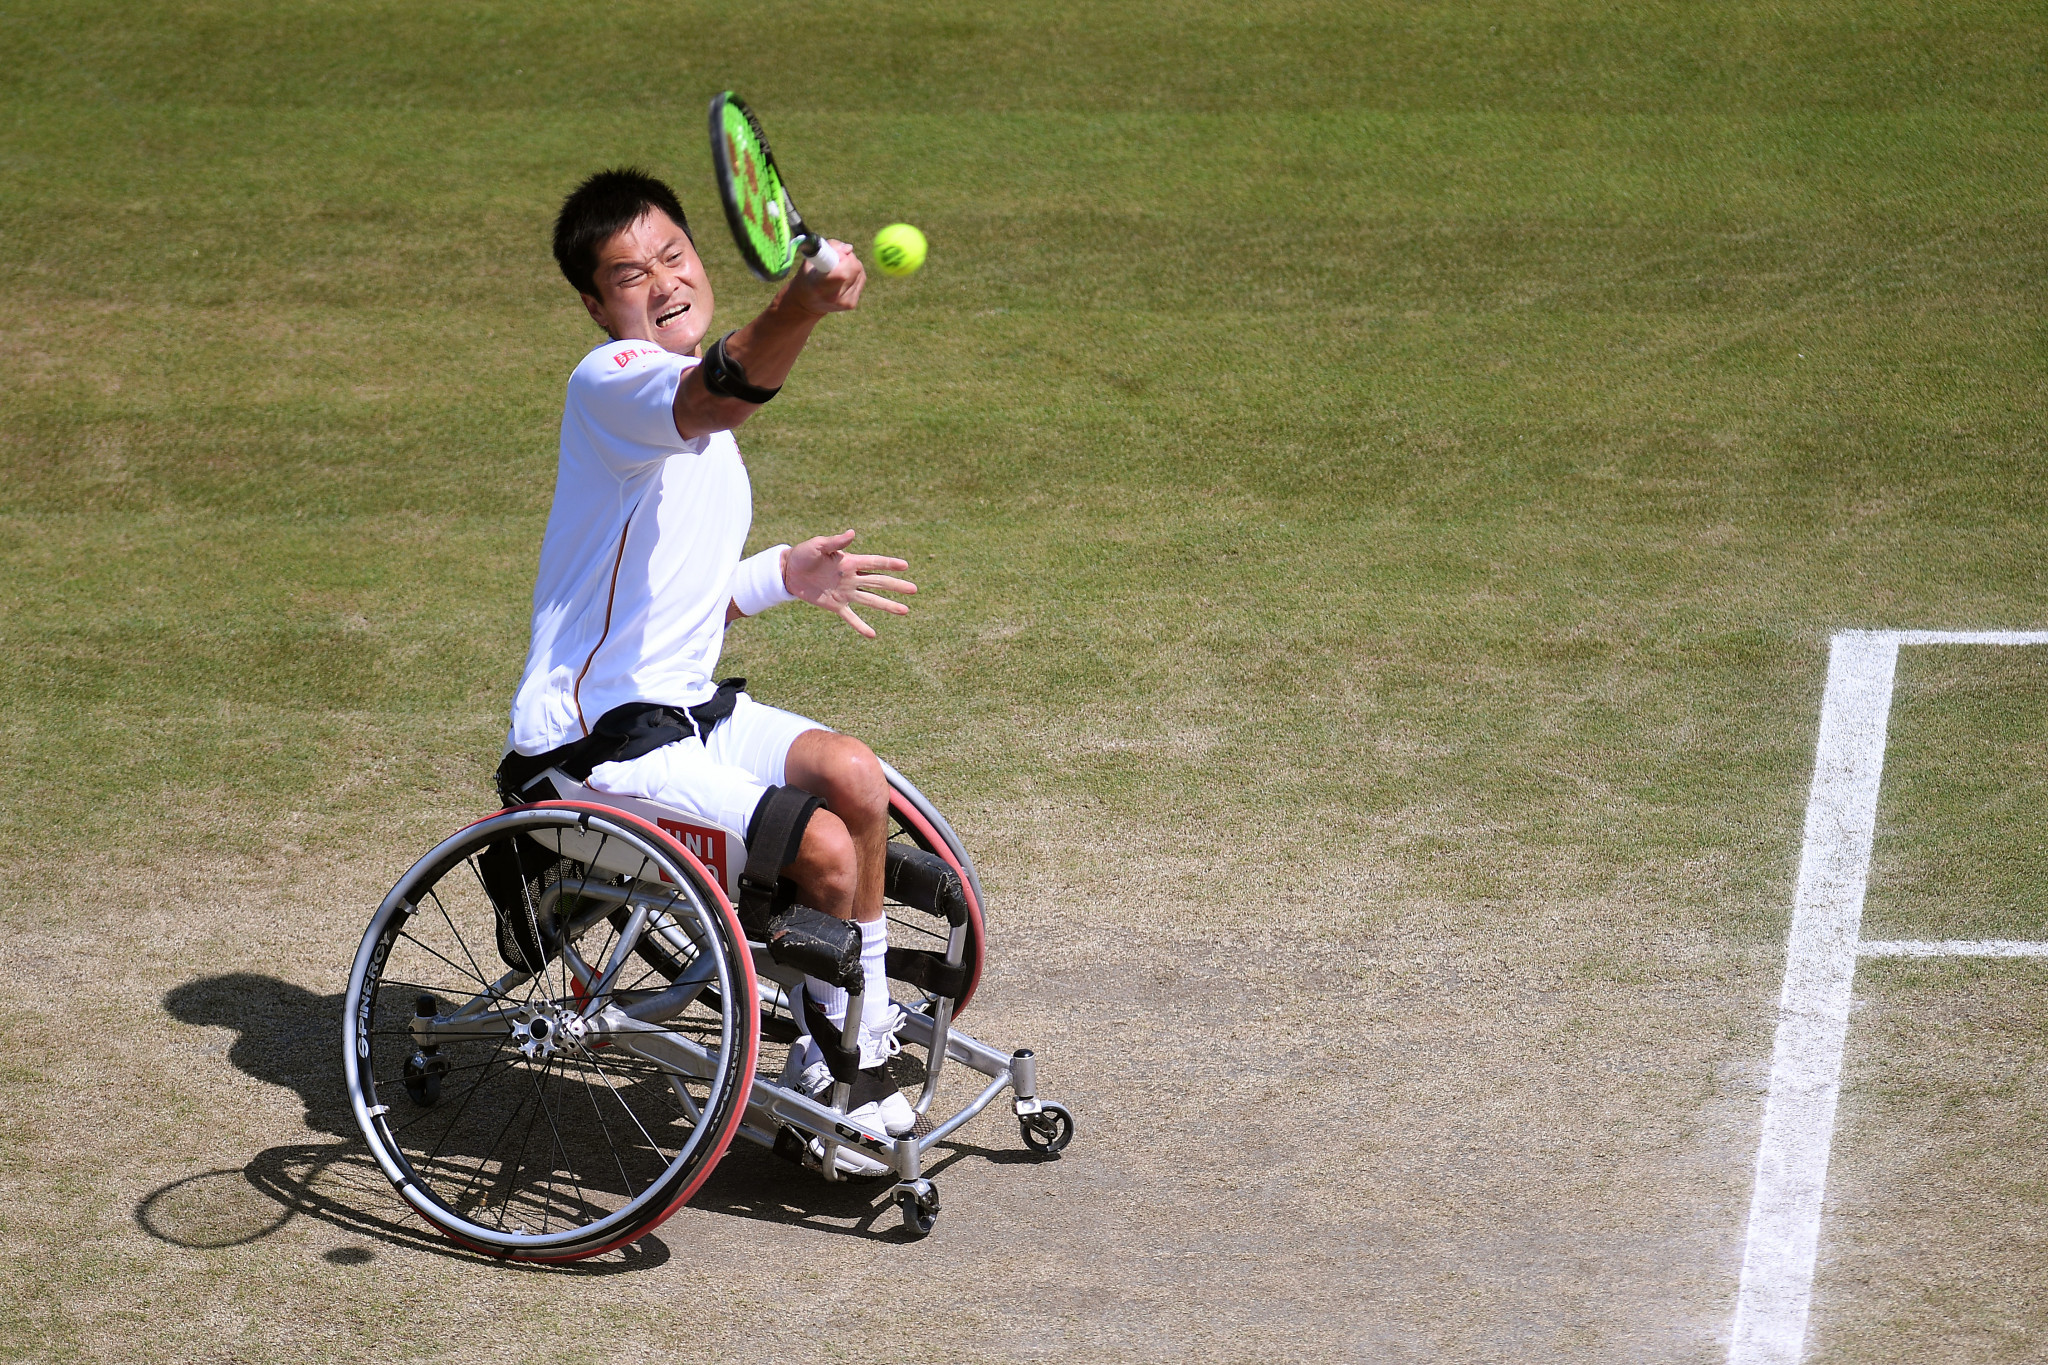 Japan's Shingo Kunieda is one win away from his first Wimbledon title ©Getty Images